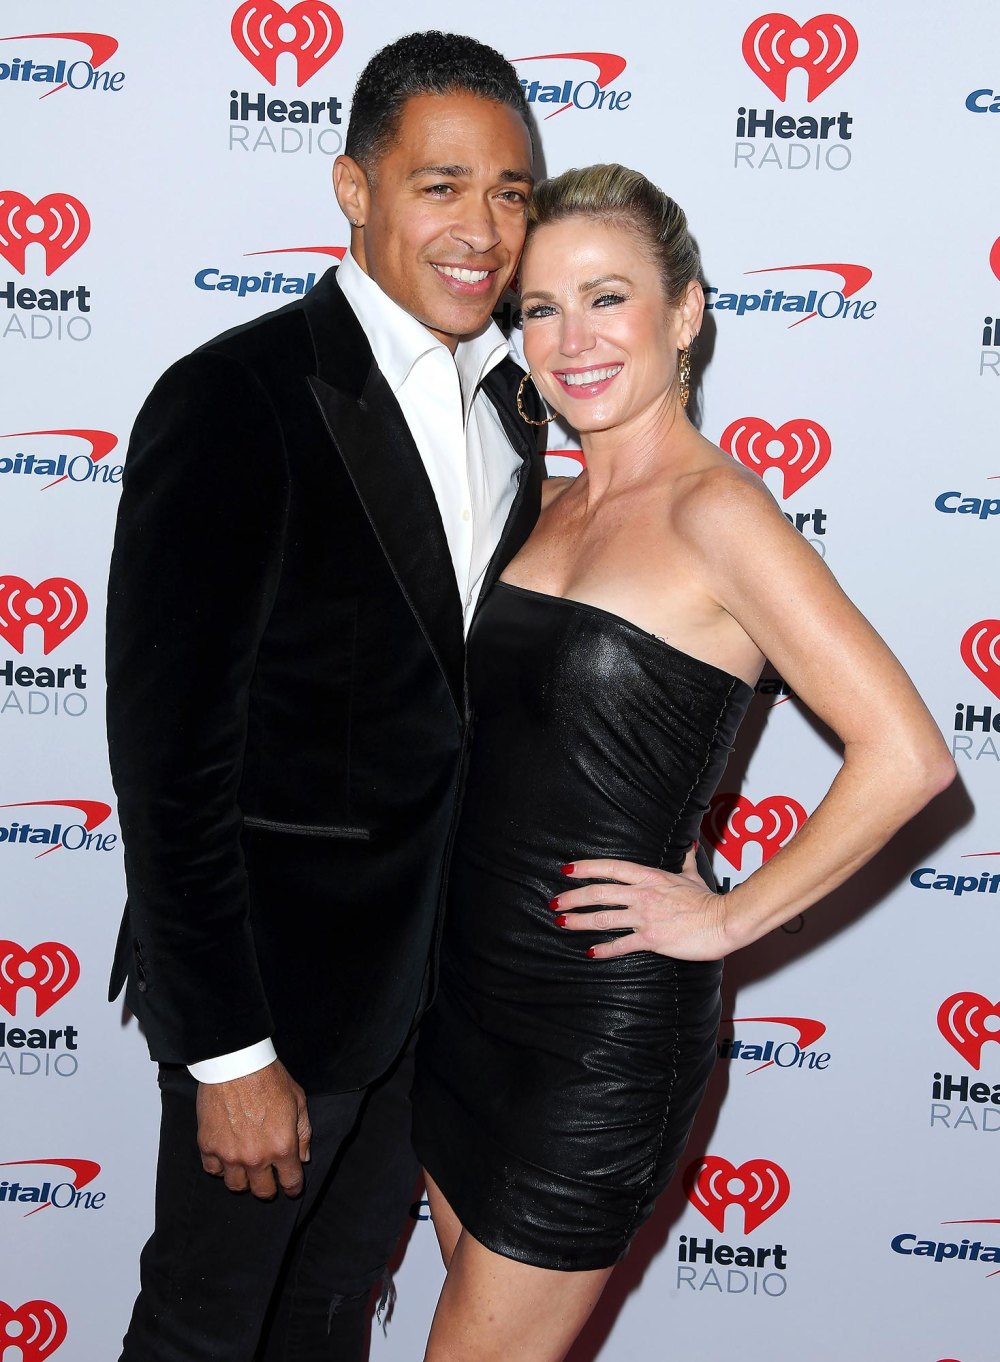 TJ Holmes Needed Wellness Check After Amy Robach Affair Fallout